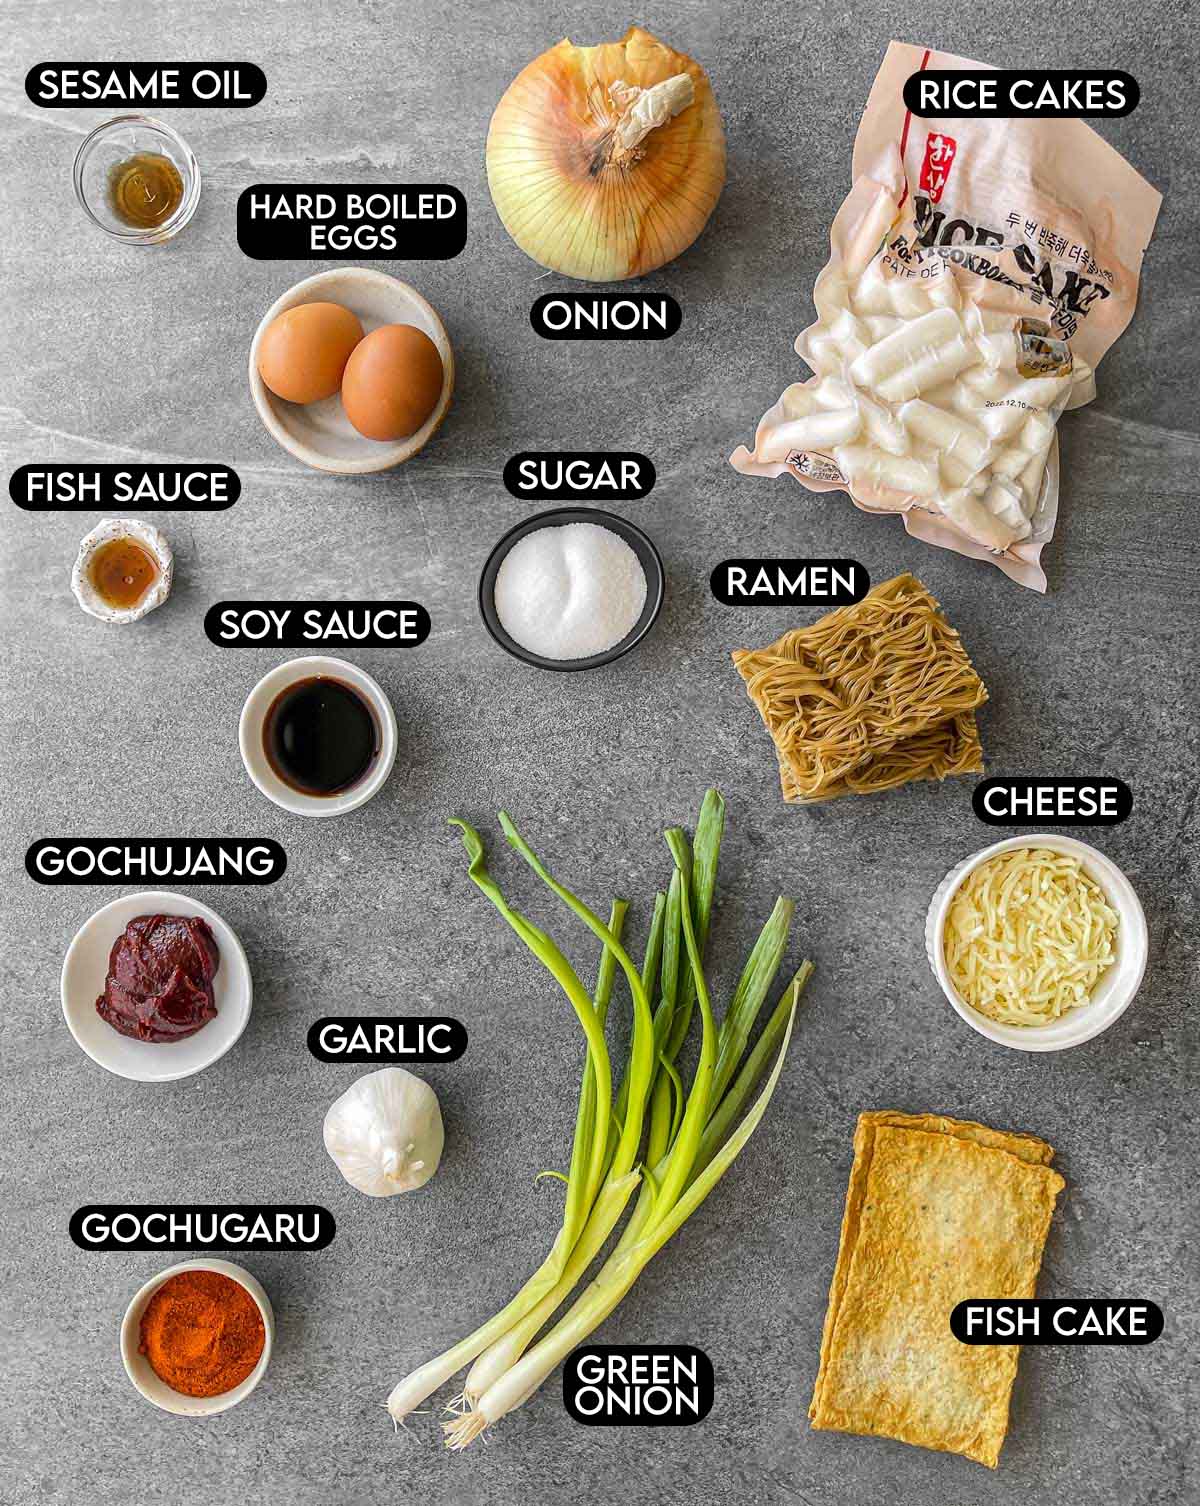 Labeled ingredients needed for rabokki.